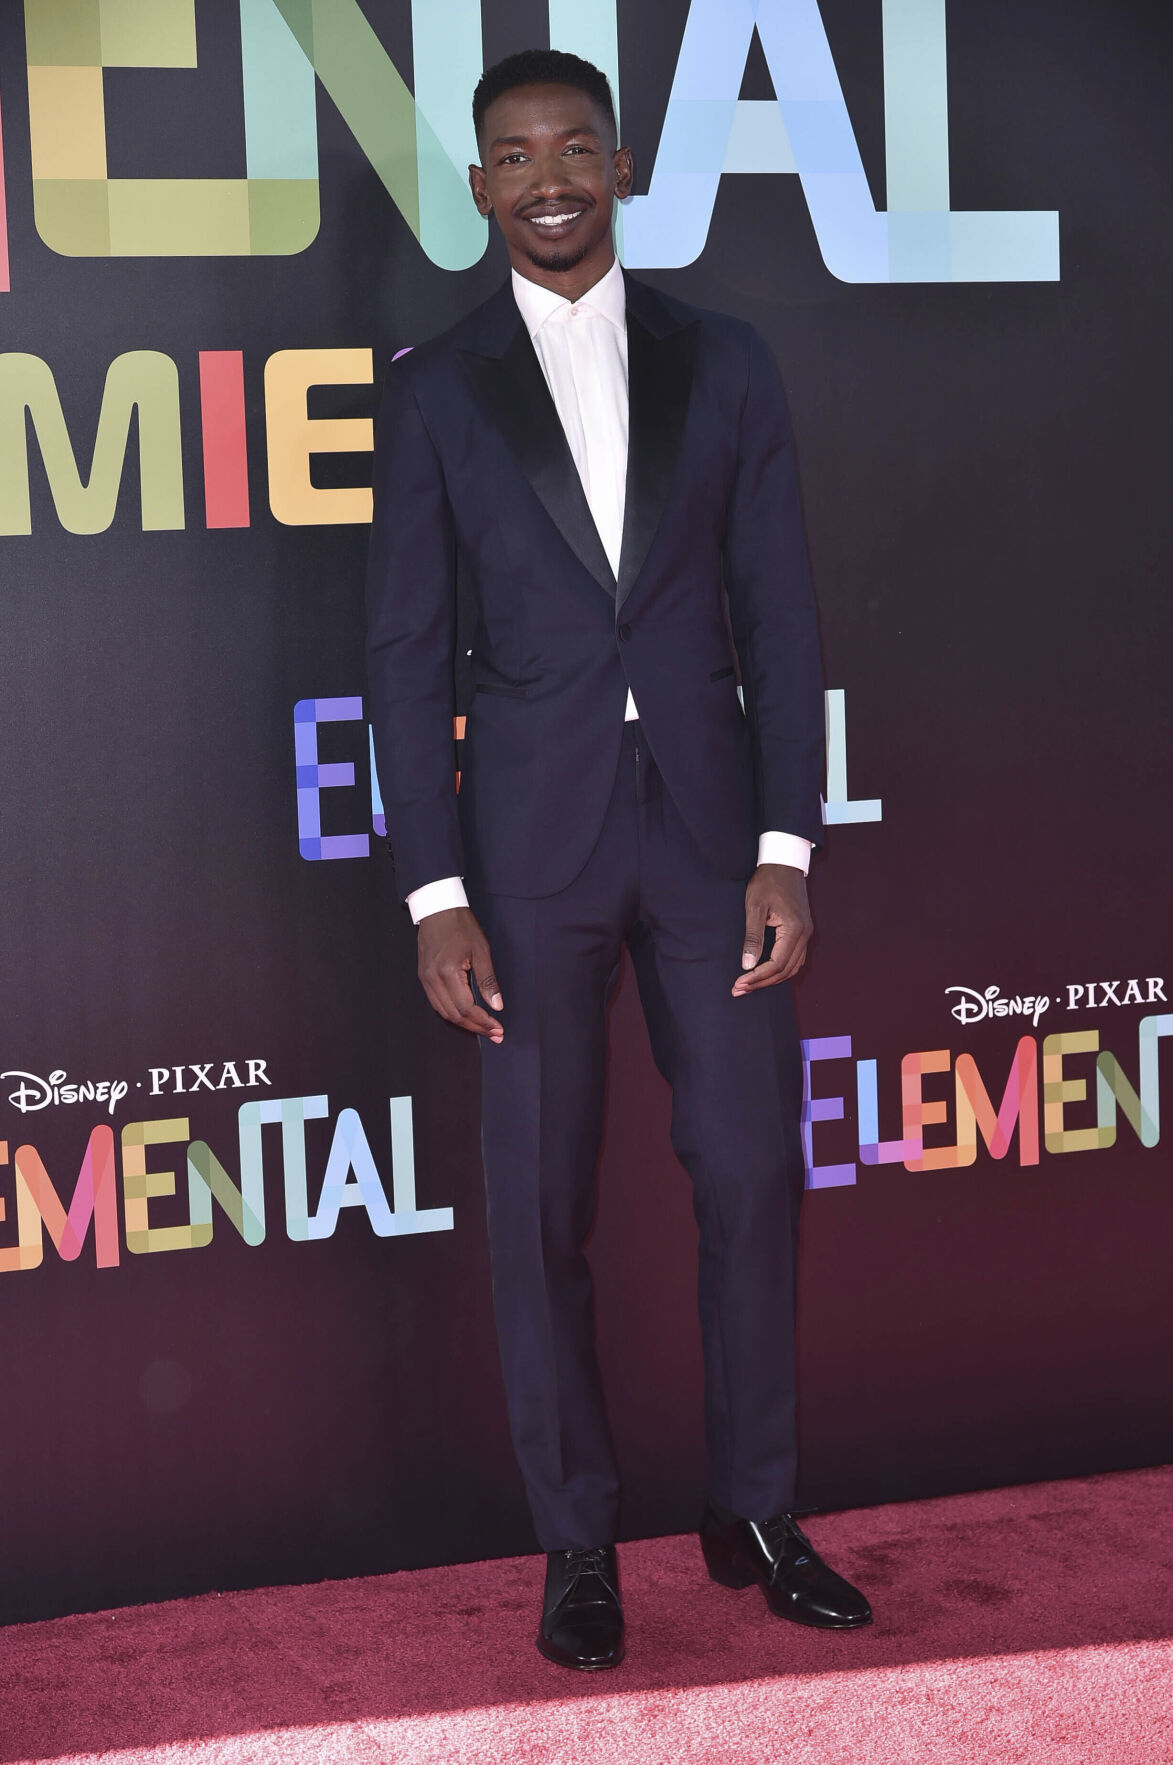 Mamoudou Athie attends the World Premiere of Disney and Pixar's feature film "Elemental" at Academy Museum of Motion Pictures in Los Angeles, California on June 08, 2023.